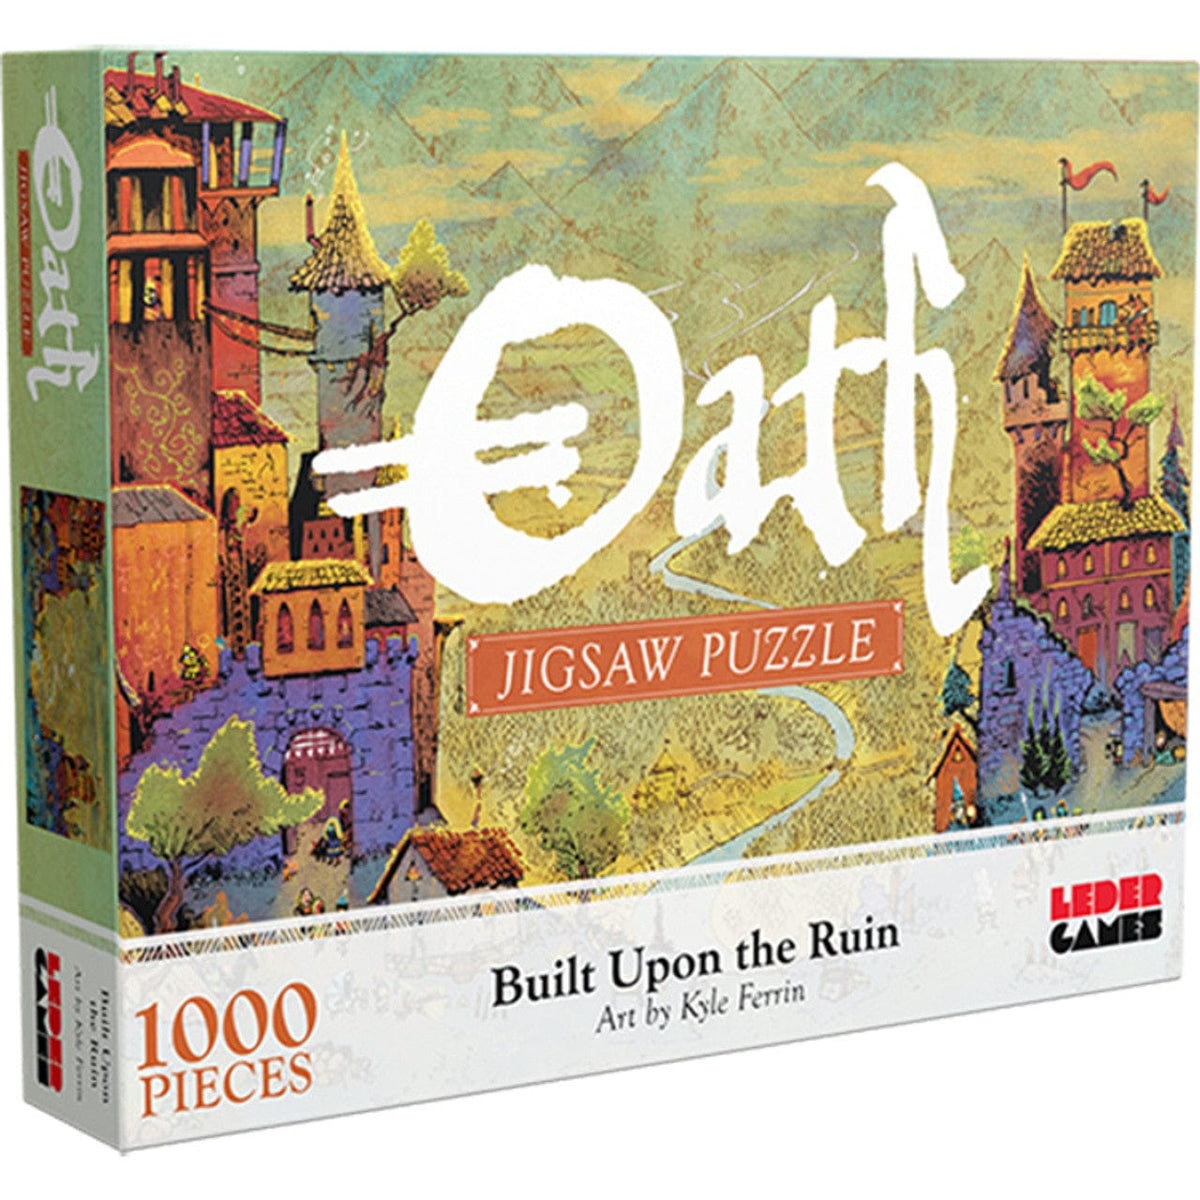 Puzzle: Oath - Built Upon the Ruin - Third Eye